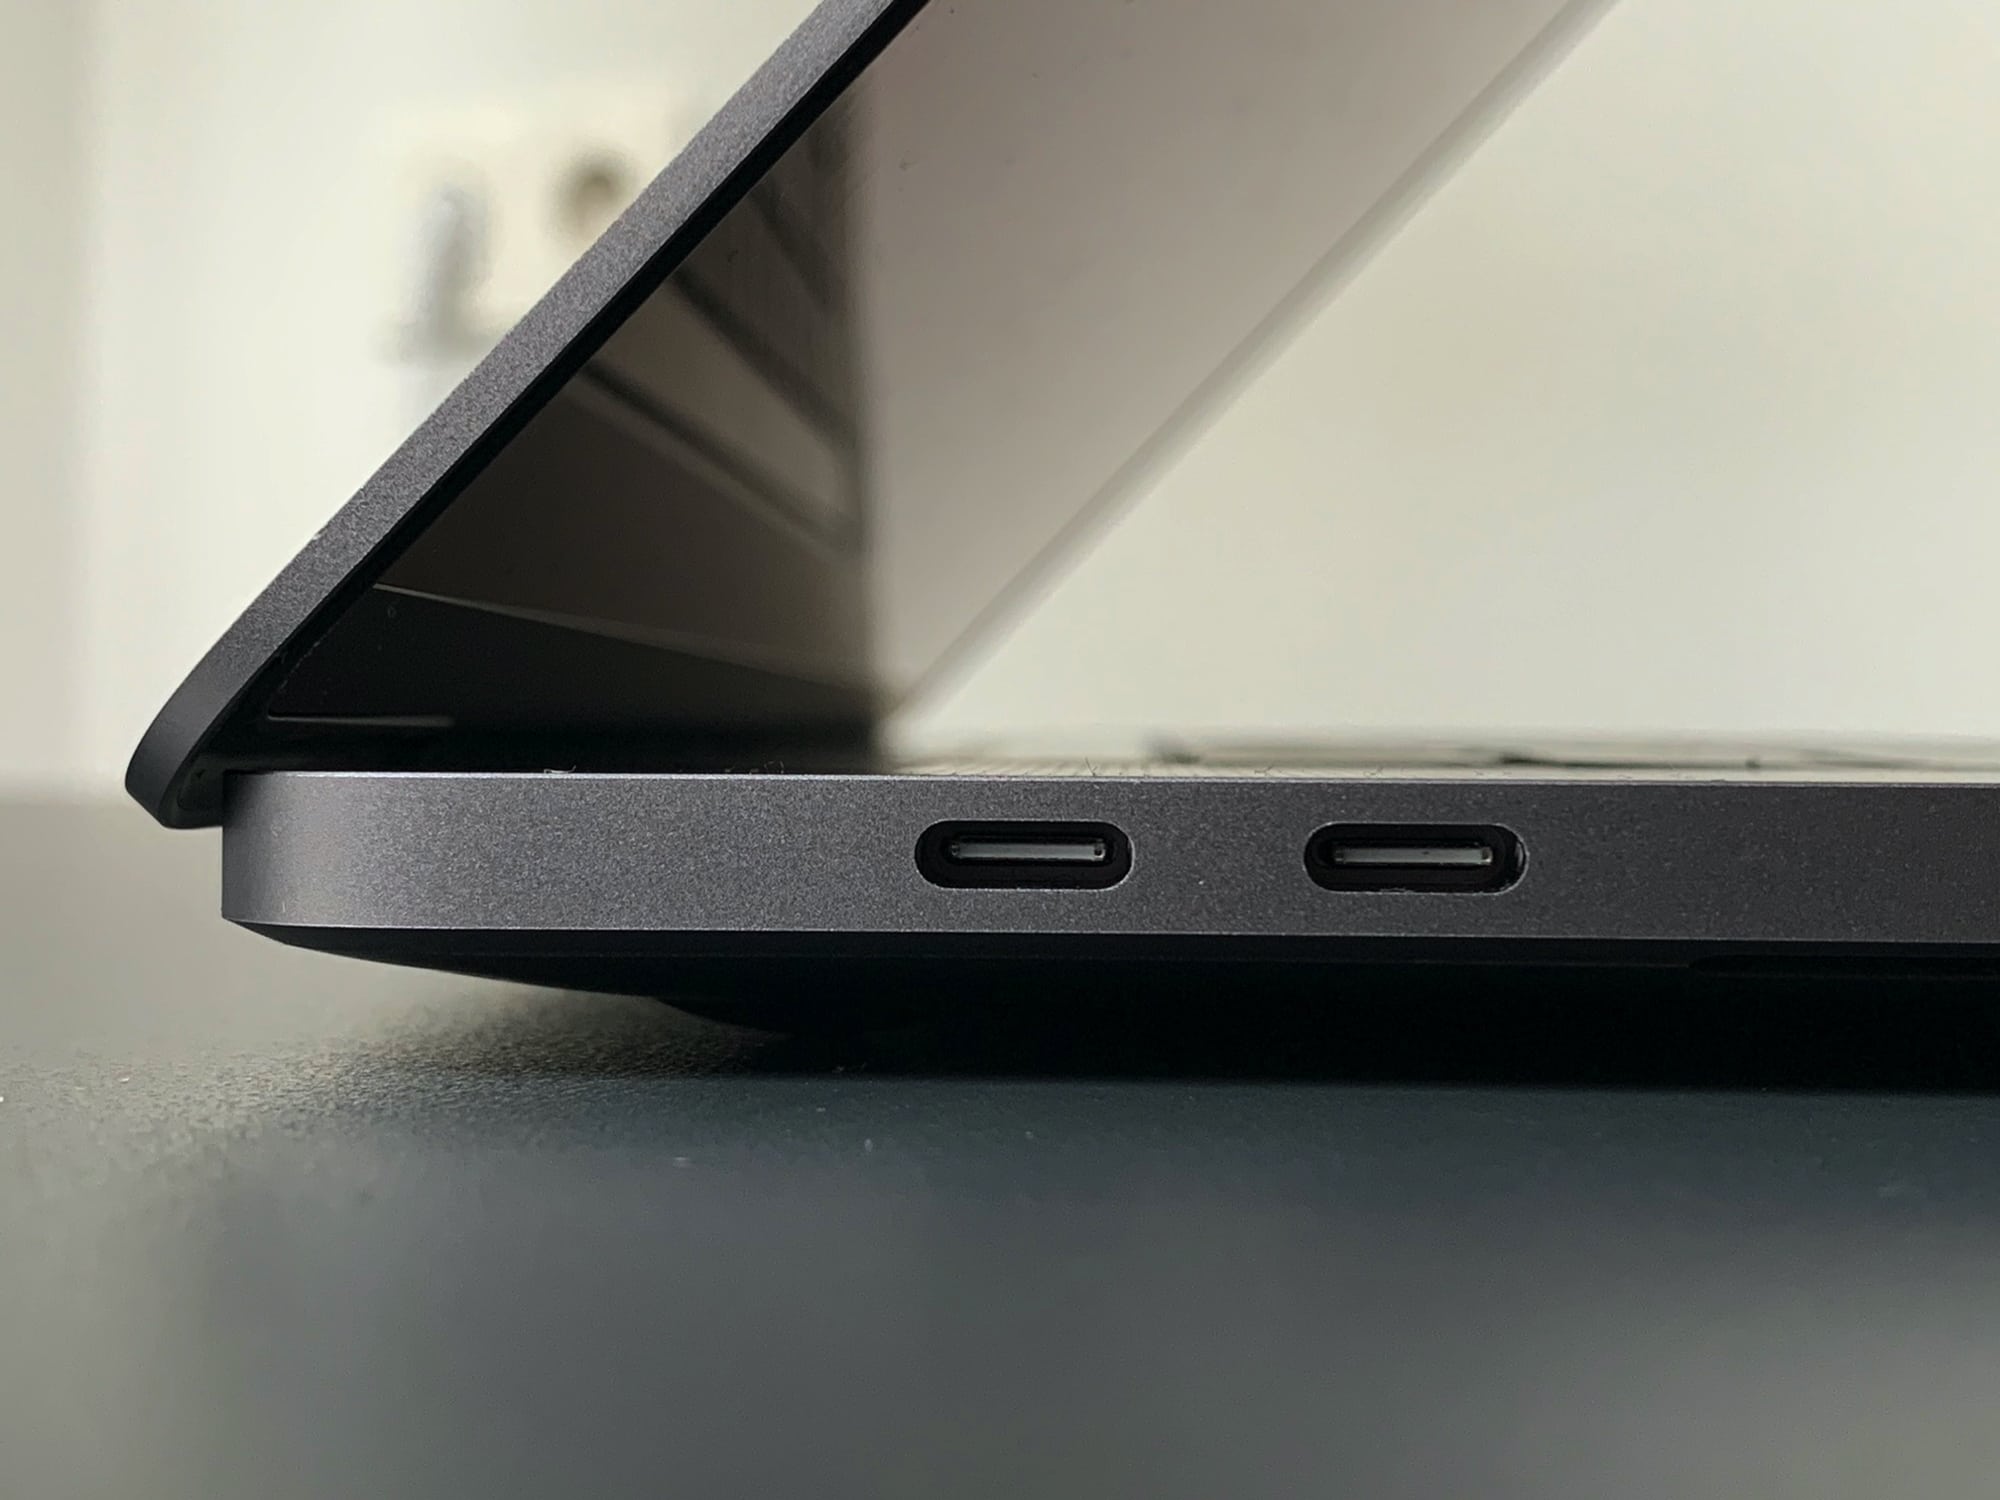 To an iPad user, four USB-C ports are a luxury.